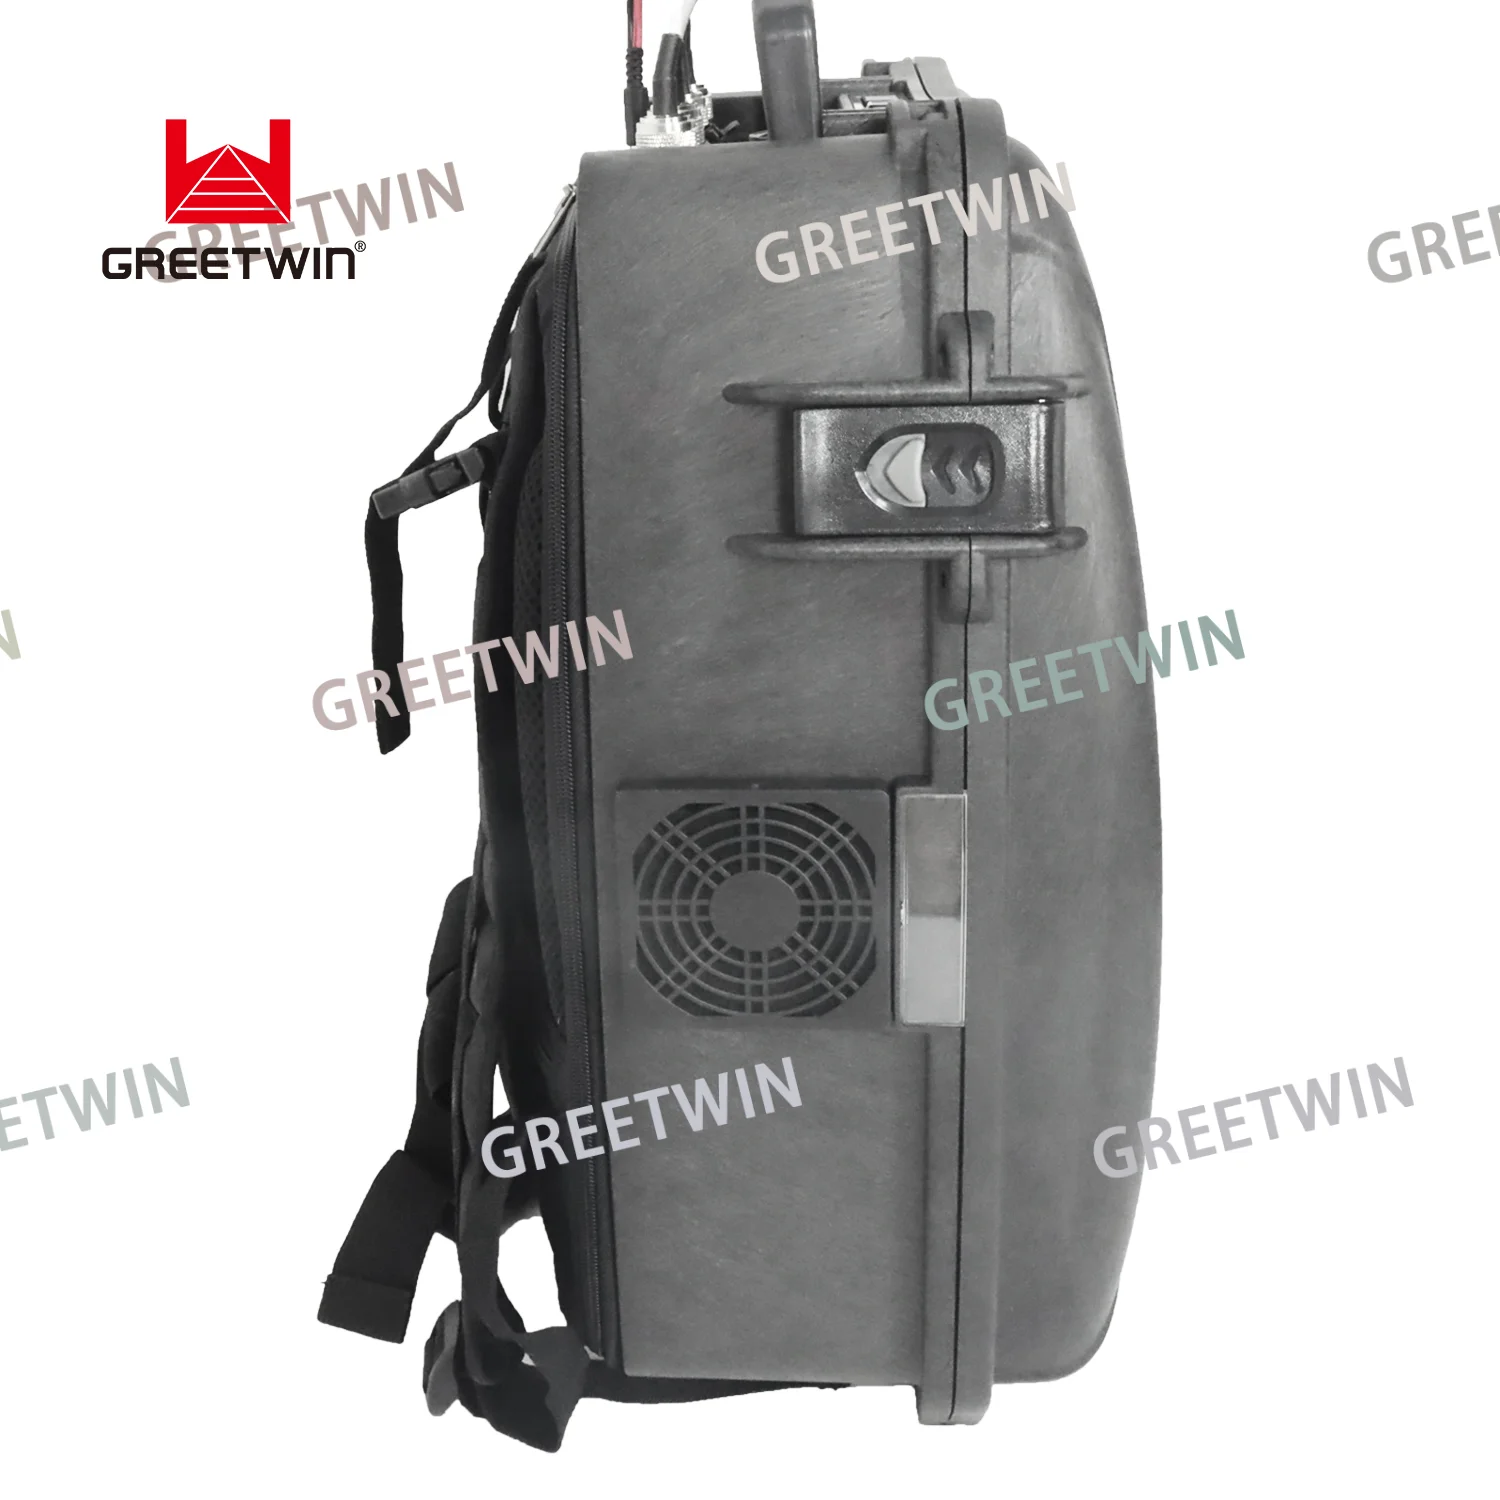 Greetwin 185W 5 Band Backpack Signal detector System to 1.2KM